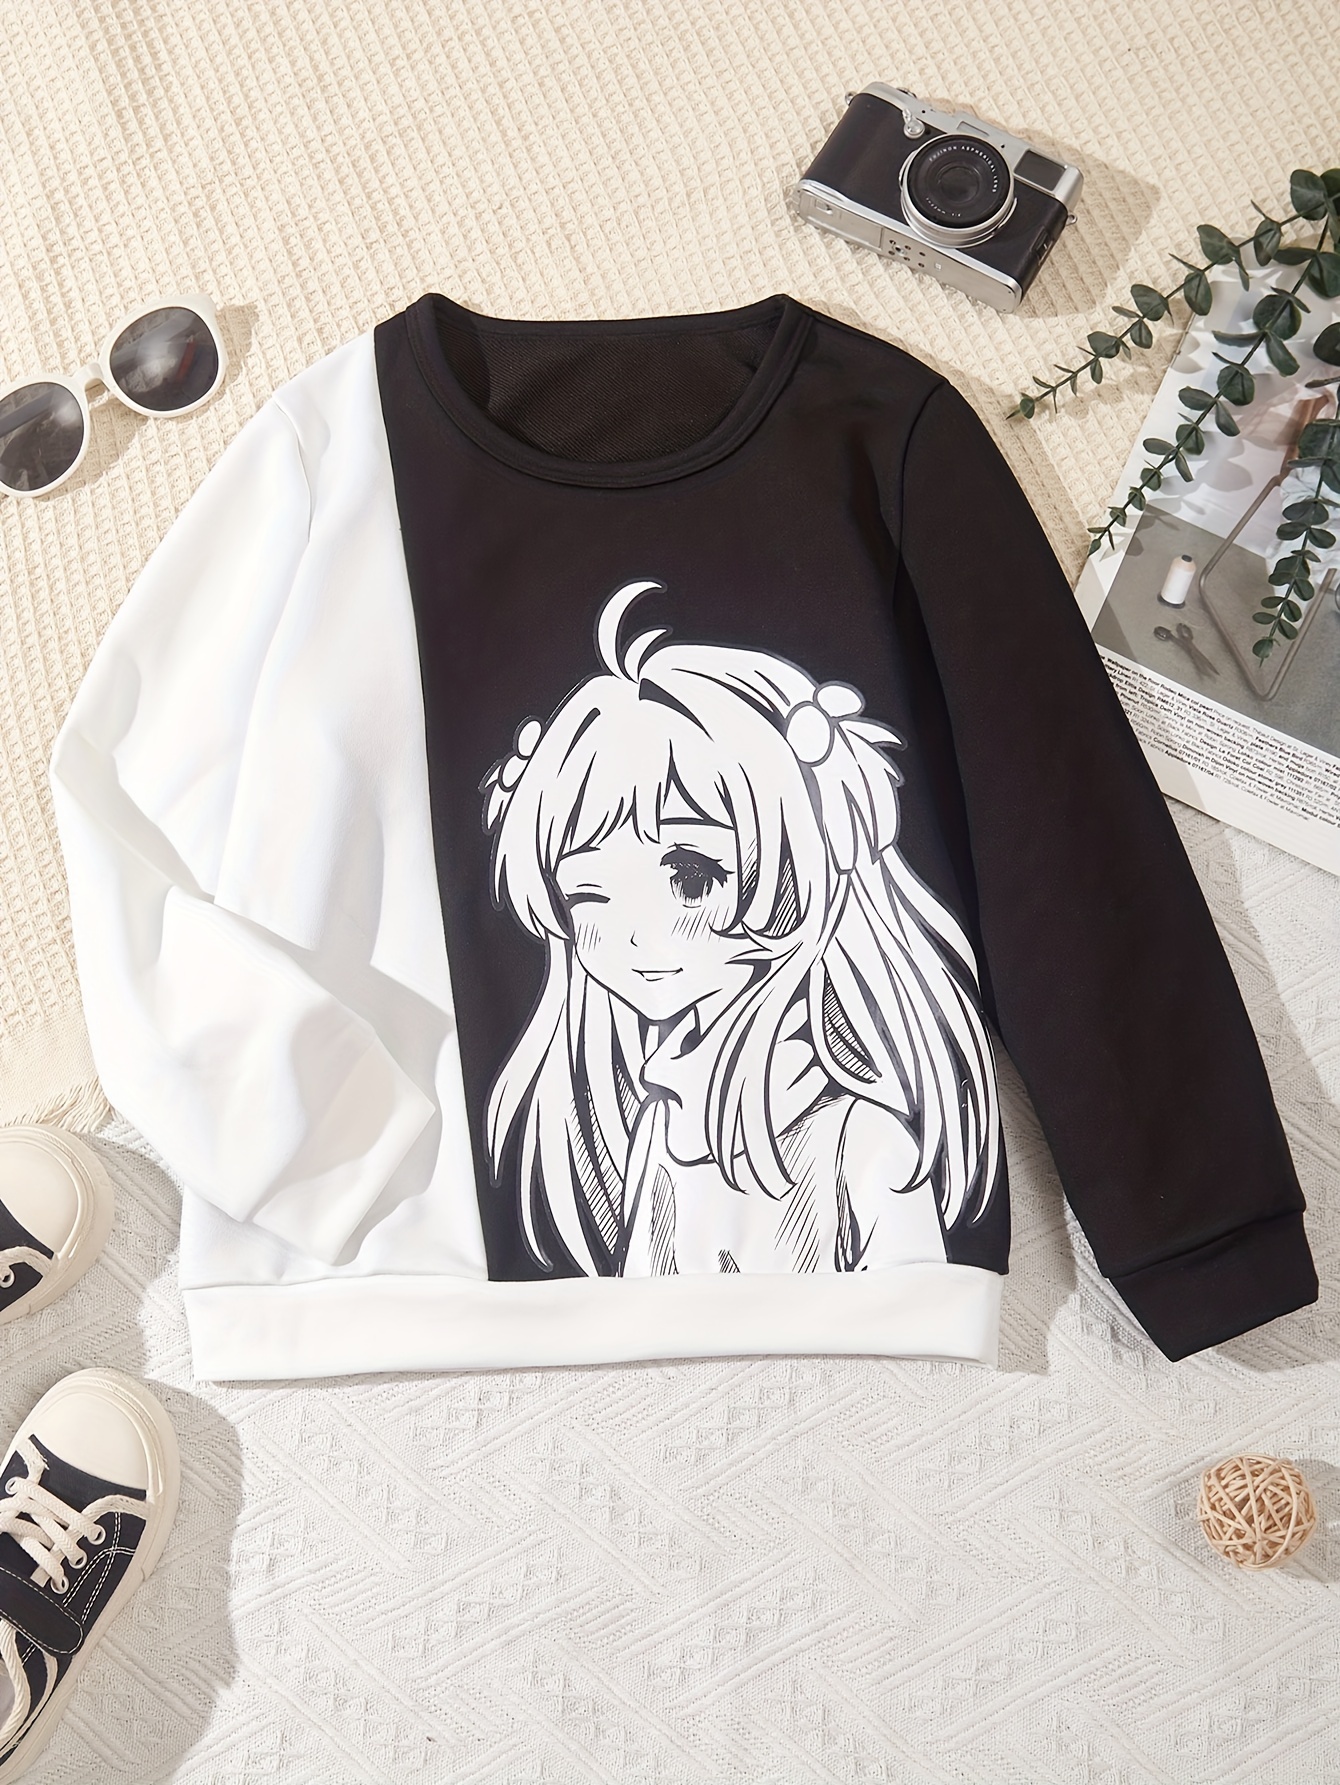 Is That The New Anime Women's Cartoon Printed Lace Trim Colorblock